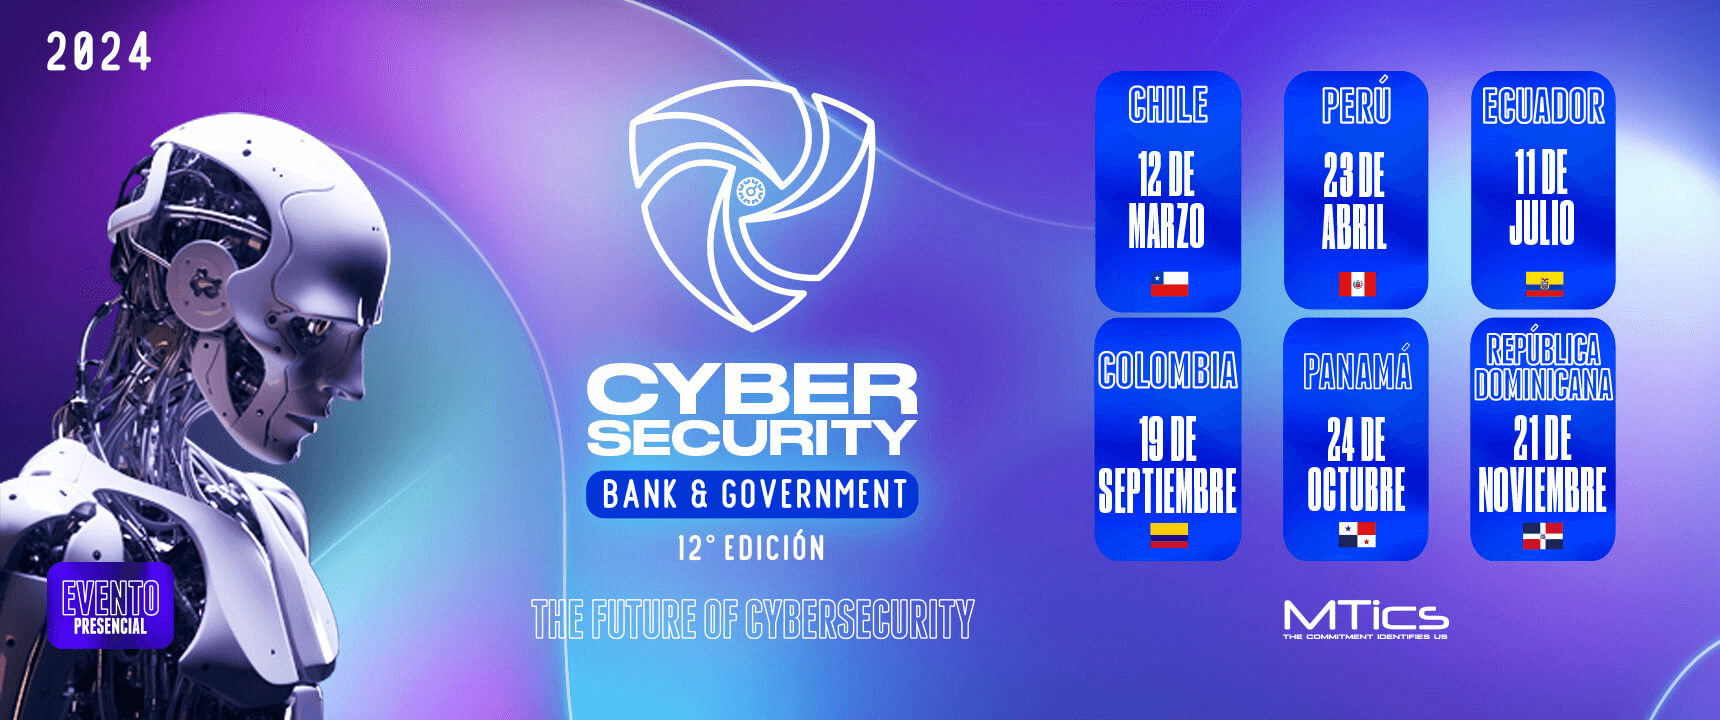 Cybersecurity Bank & Government 2024